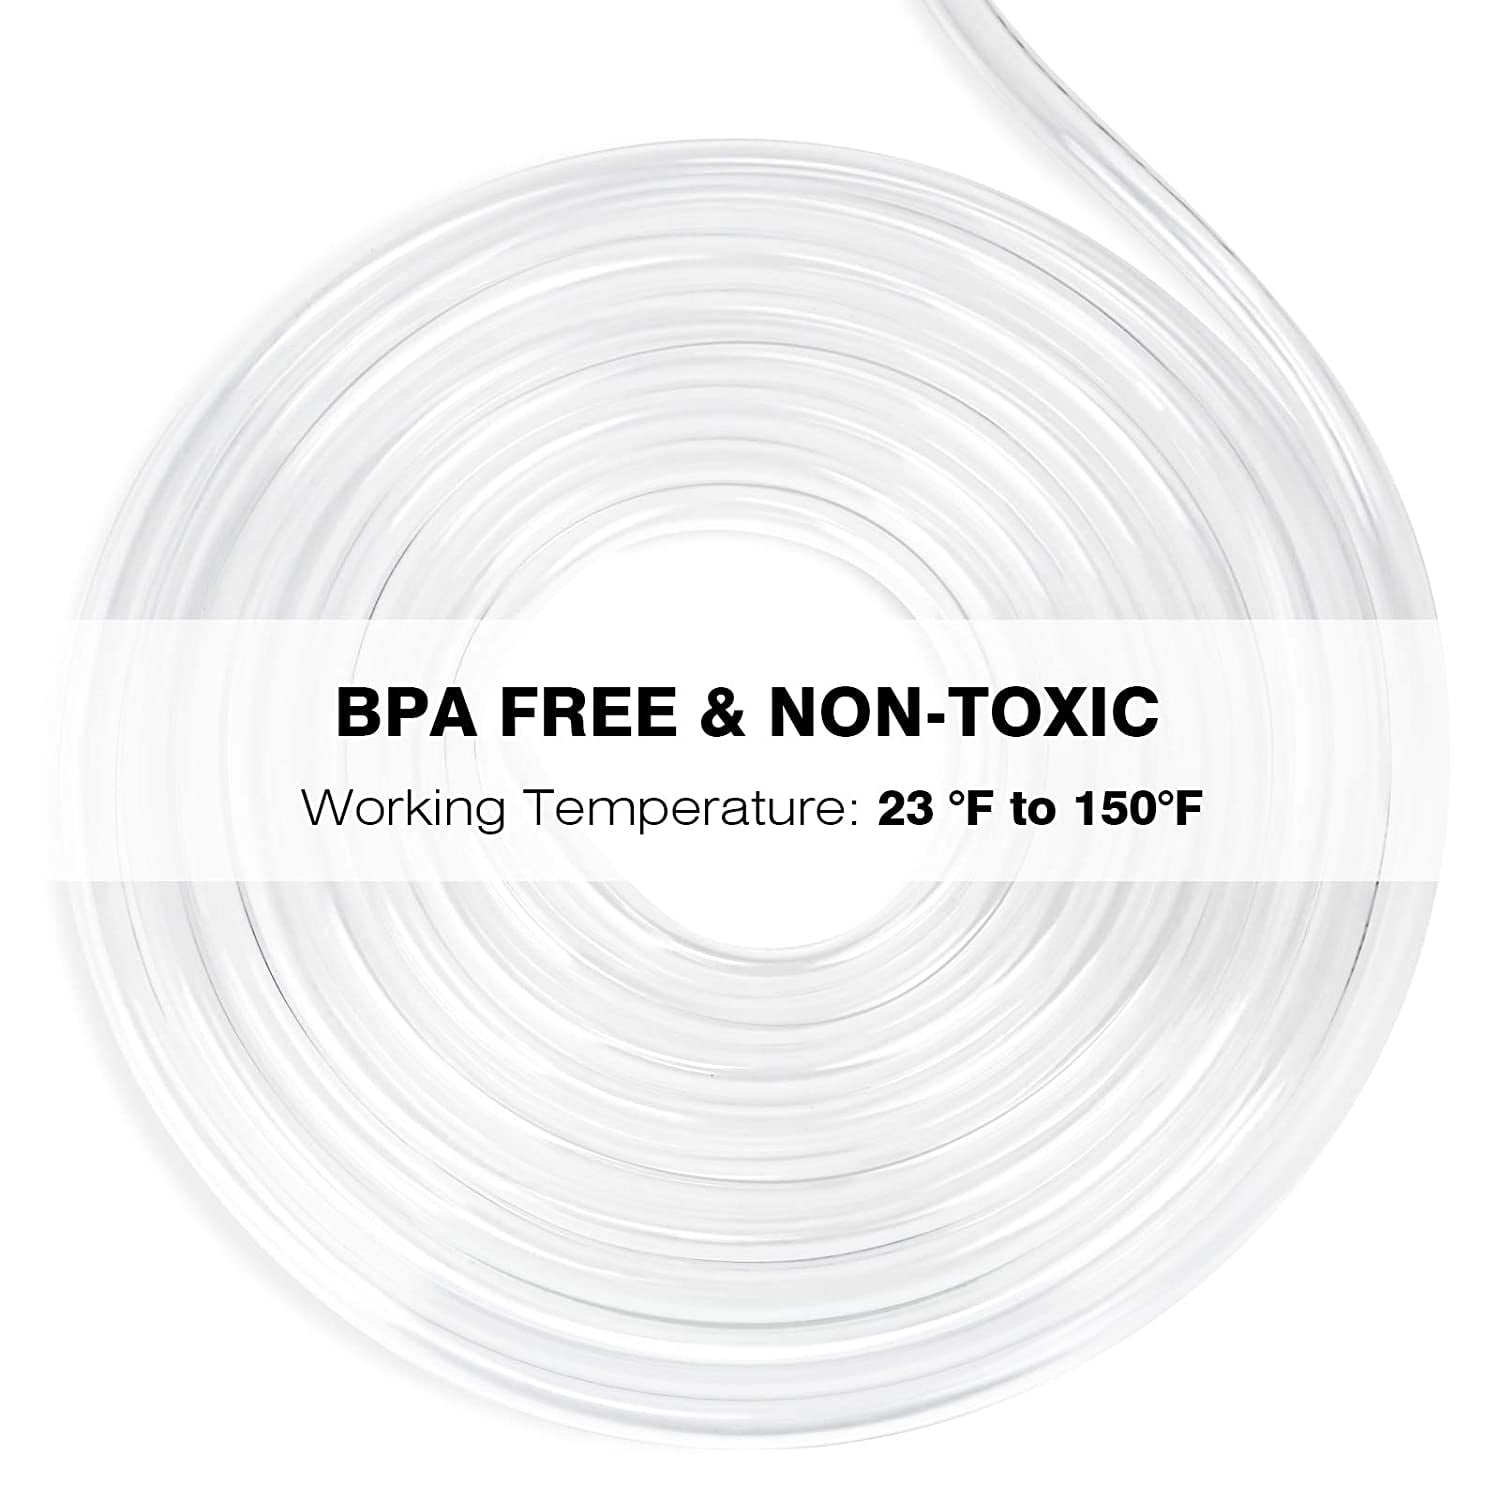 60PSI BPA Free and Non-Toxic Multipurpose Clear Tubing Reinforced with 2 Stainless Screw Clamps 1/2 ID 5/8 OD Clear Vinyl Tubing-25 Ft Flexible Plastic Tubing 